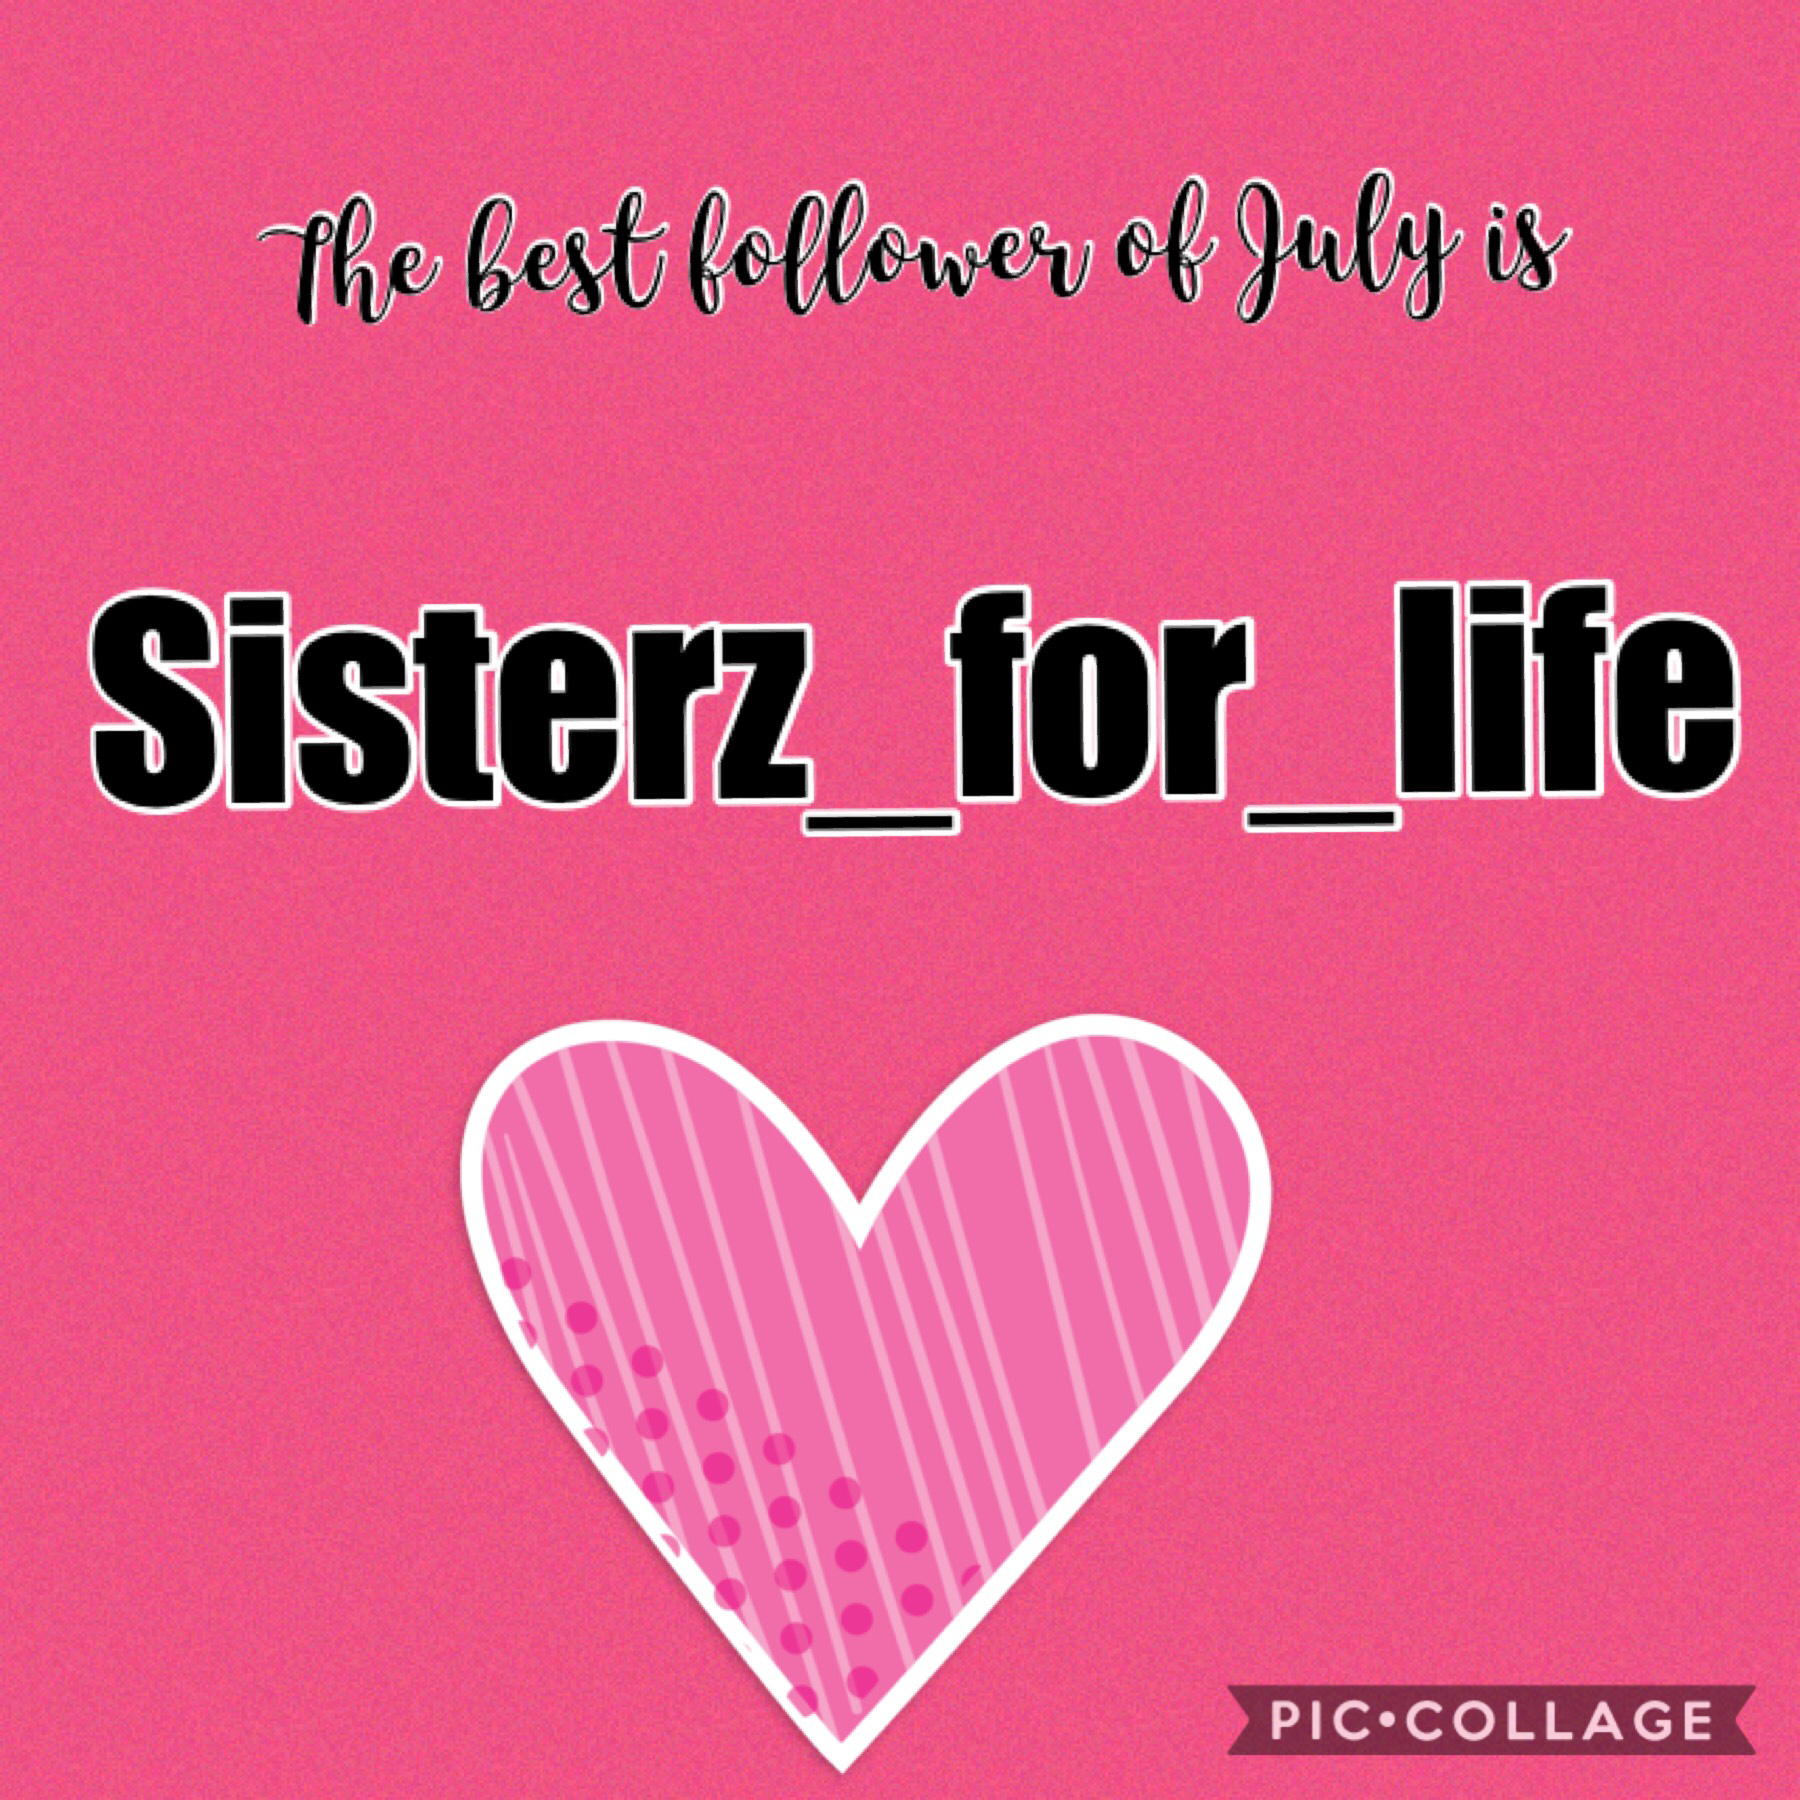 Hello sisterz for life love all ur collages and hope u get a lot more followers x